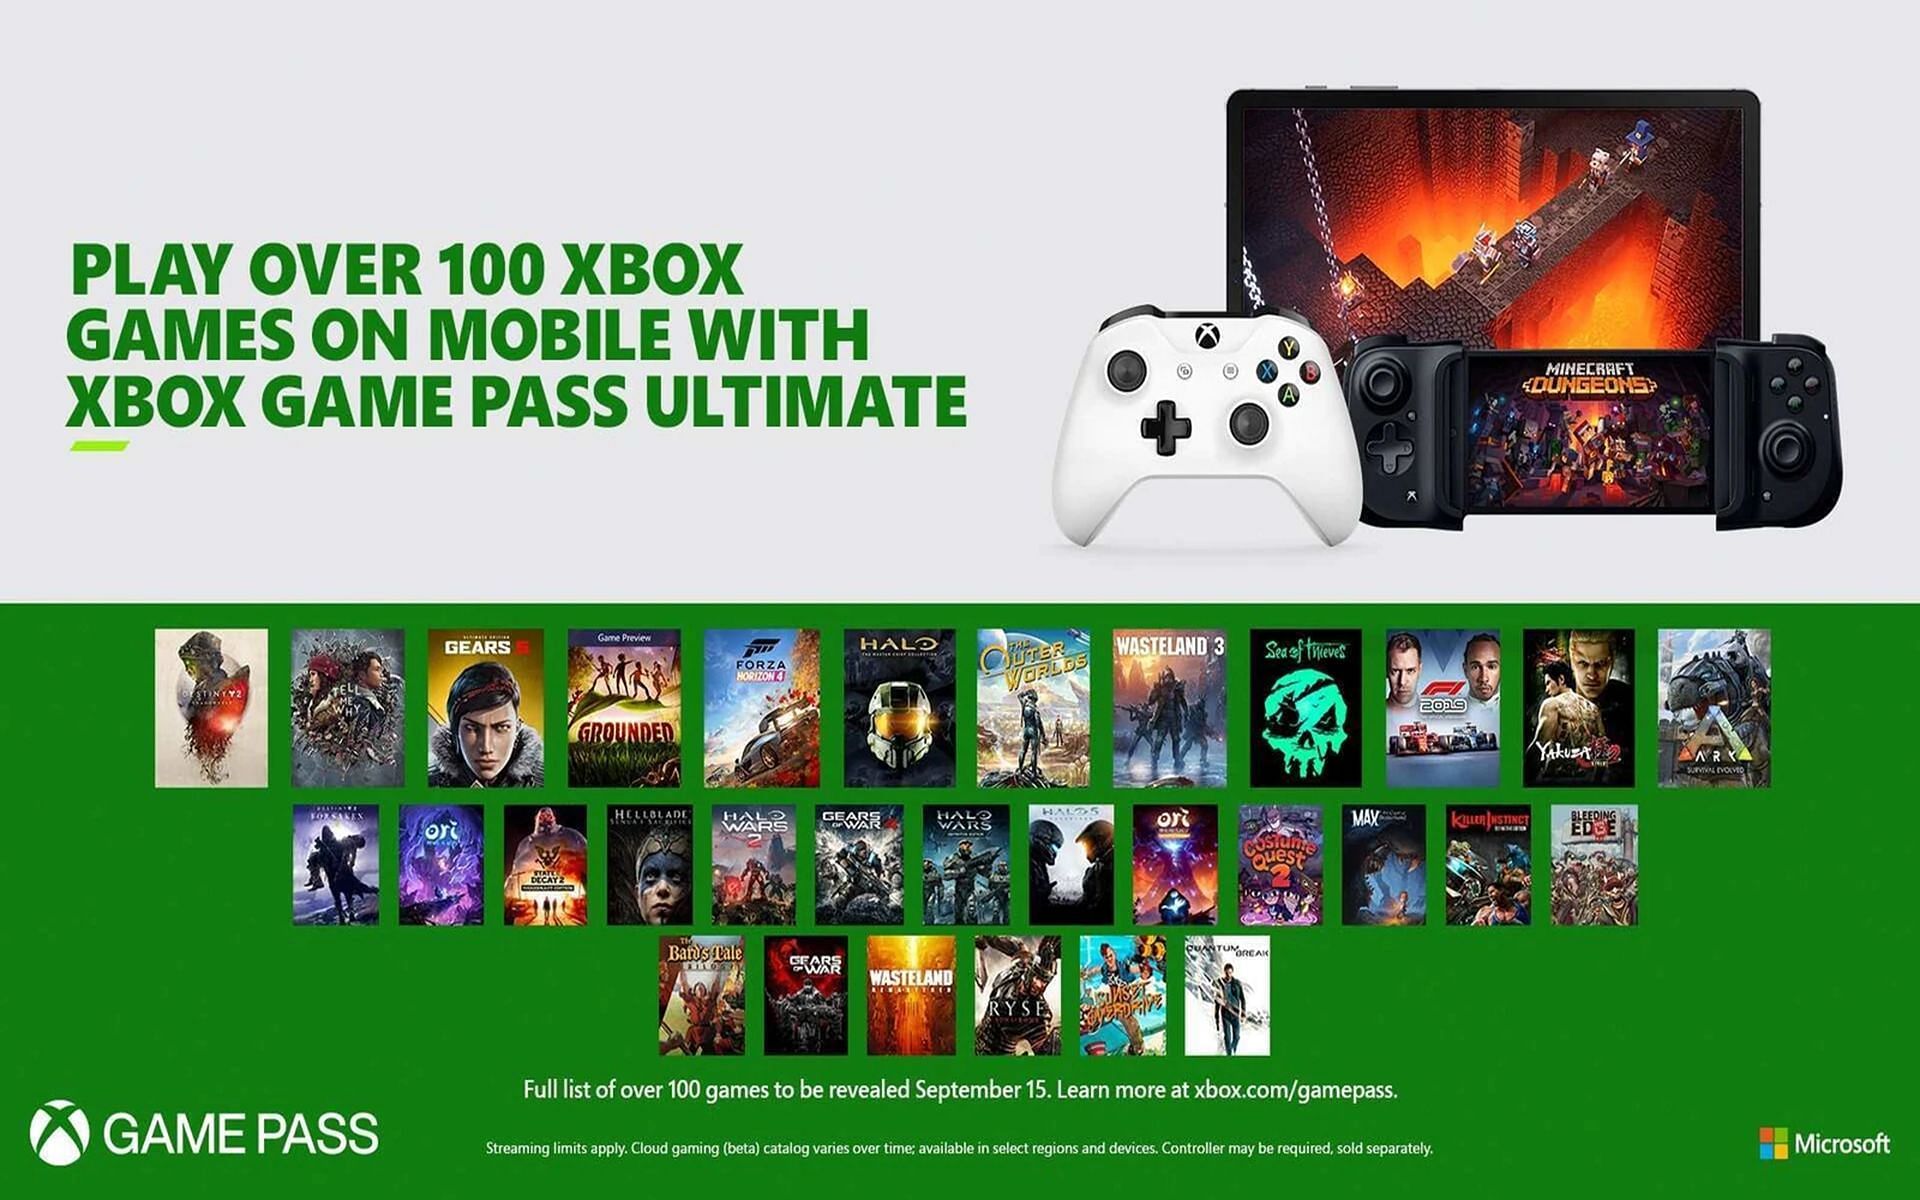 Xbox Game Pass includes 100+ games to choose from (Image by Microsoft)